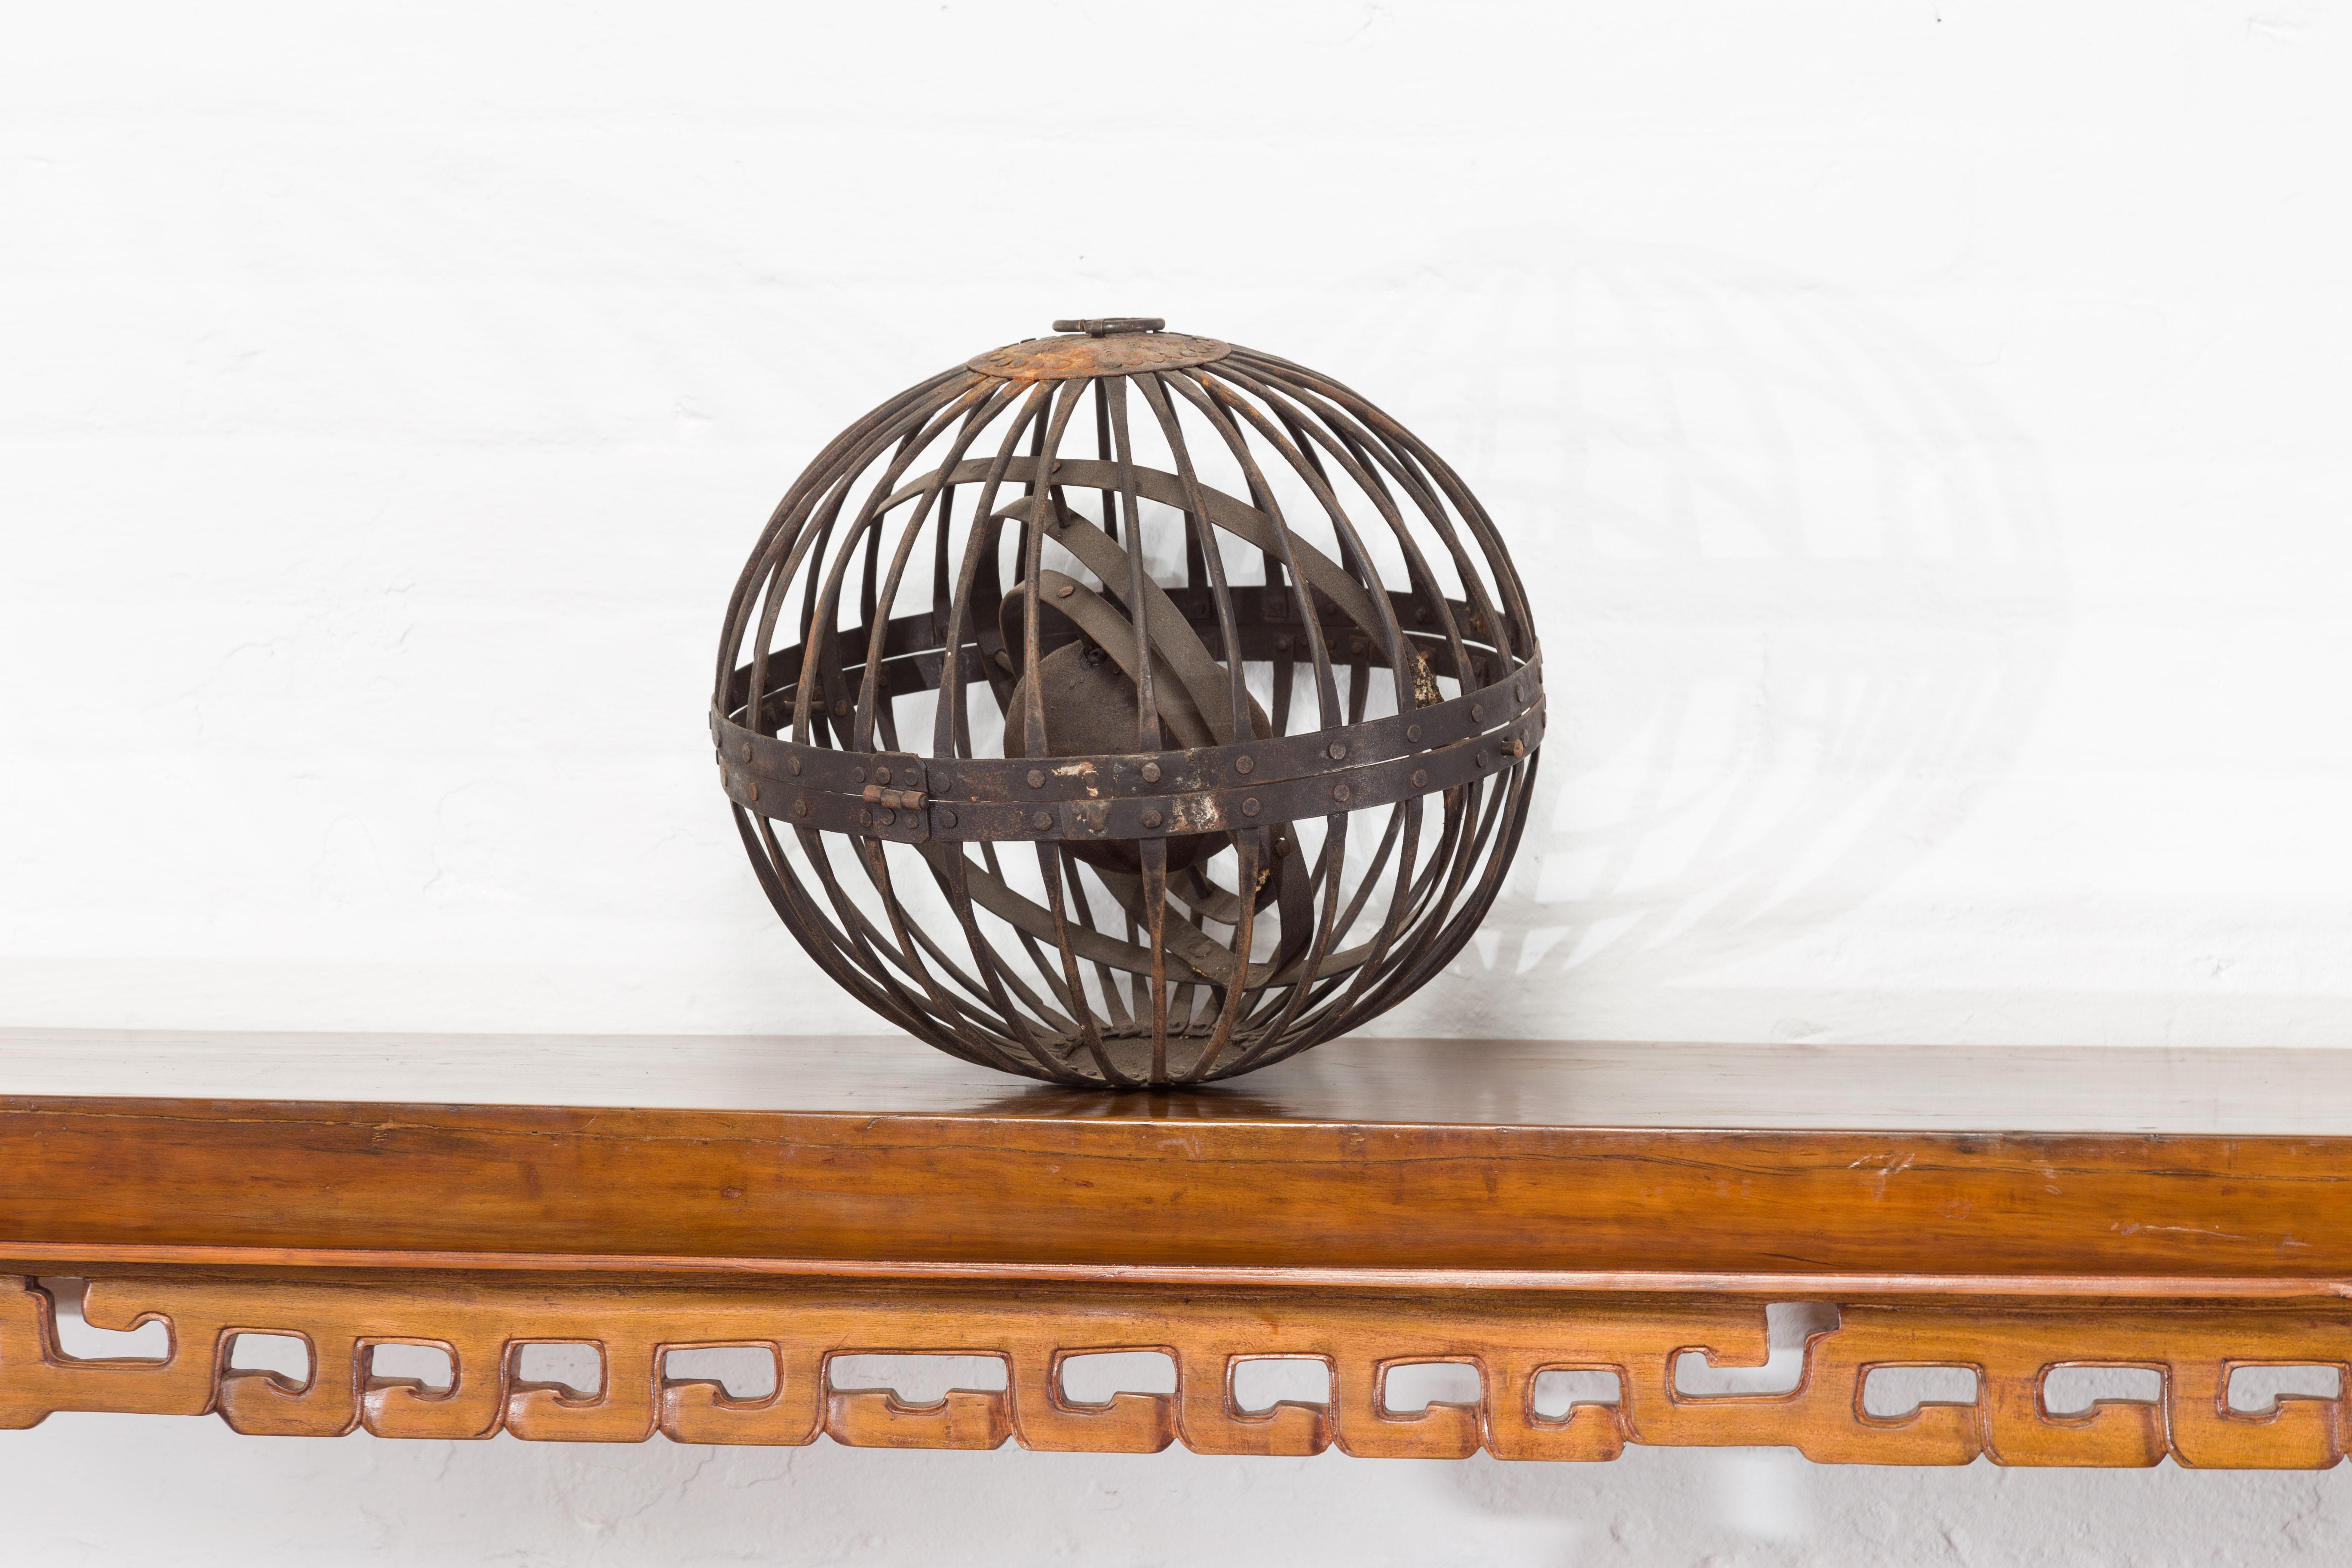 Indian Vintage Spherical Iron Light Fixture with Concentric Rings and Patina In Good Condition For Sale In Yonkers, NY